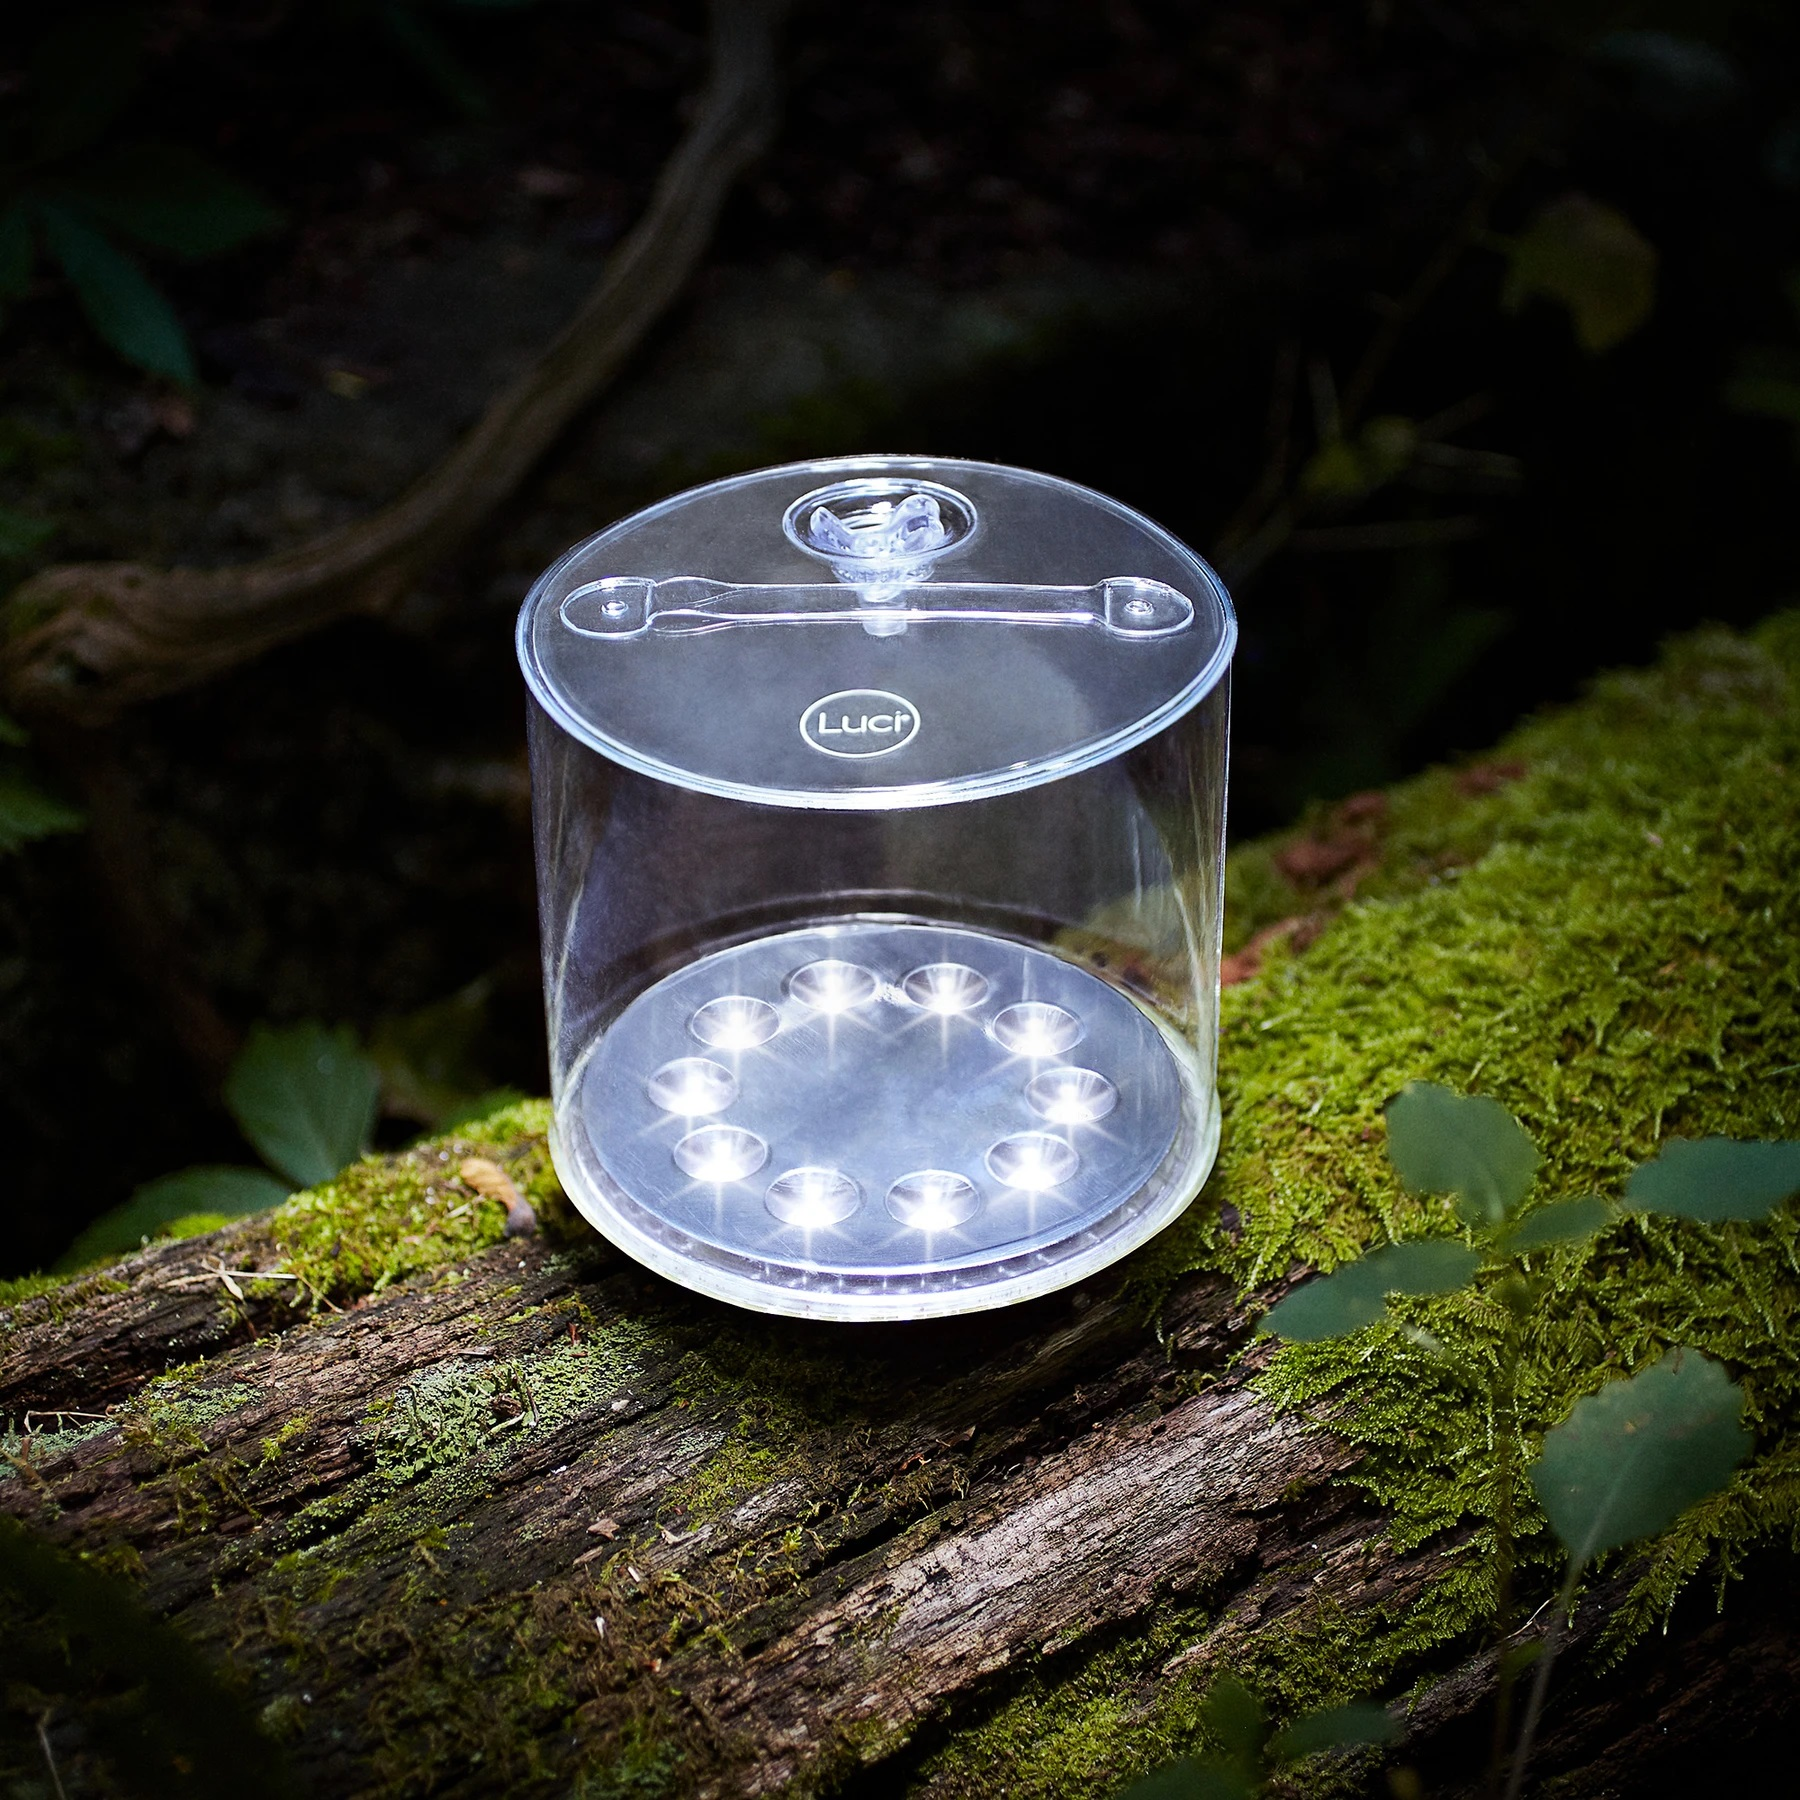 LED LUCI MPOWERED 2.0 Lampe OUTDOOR Solar